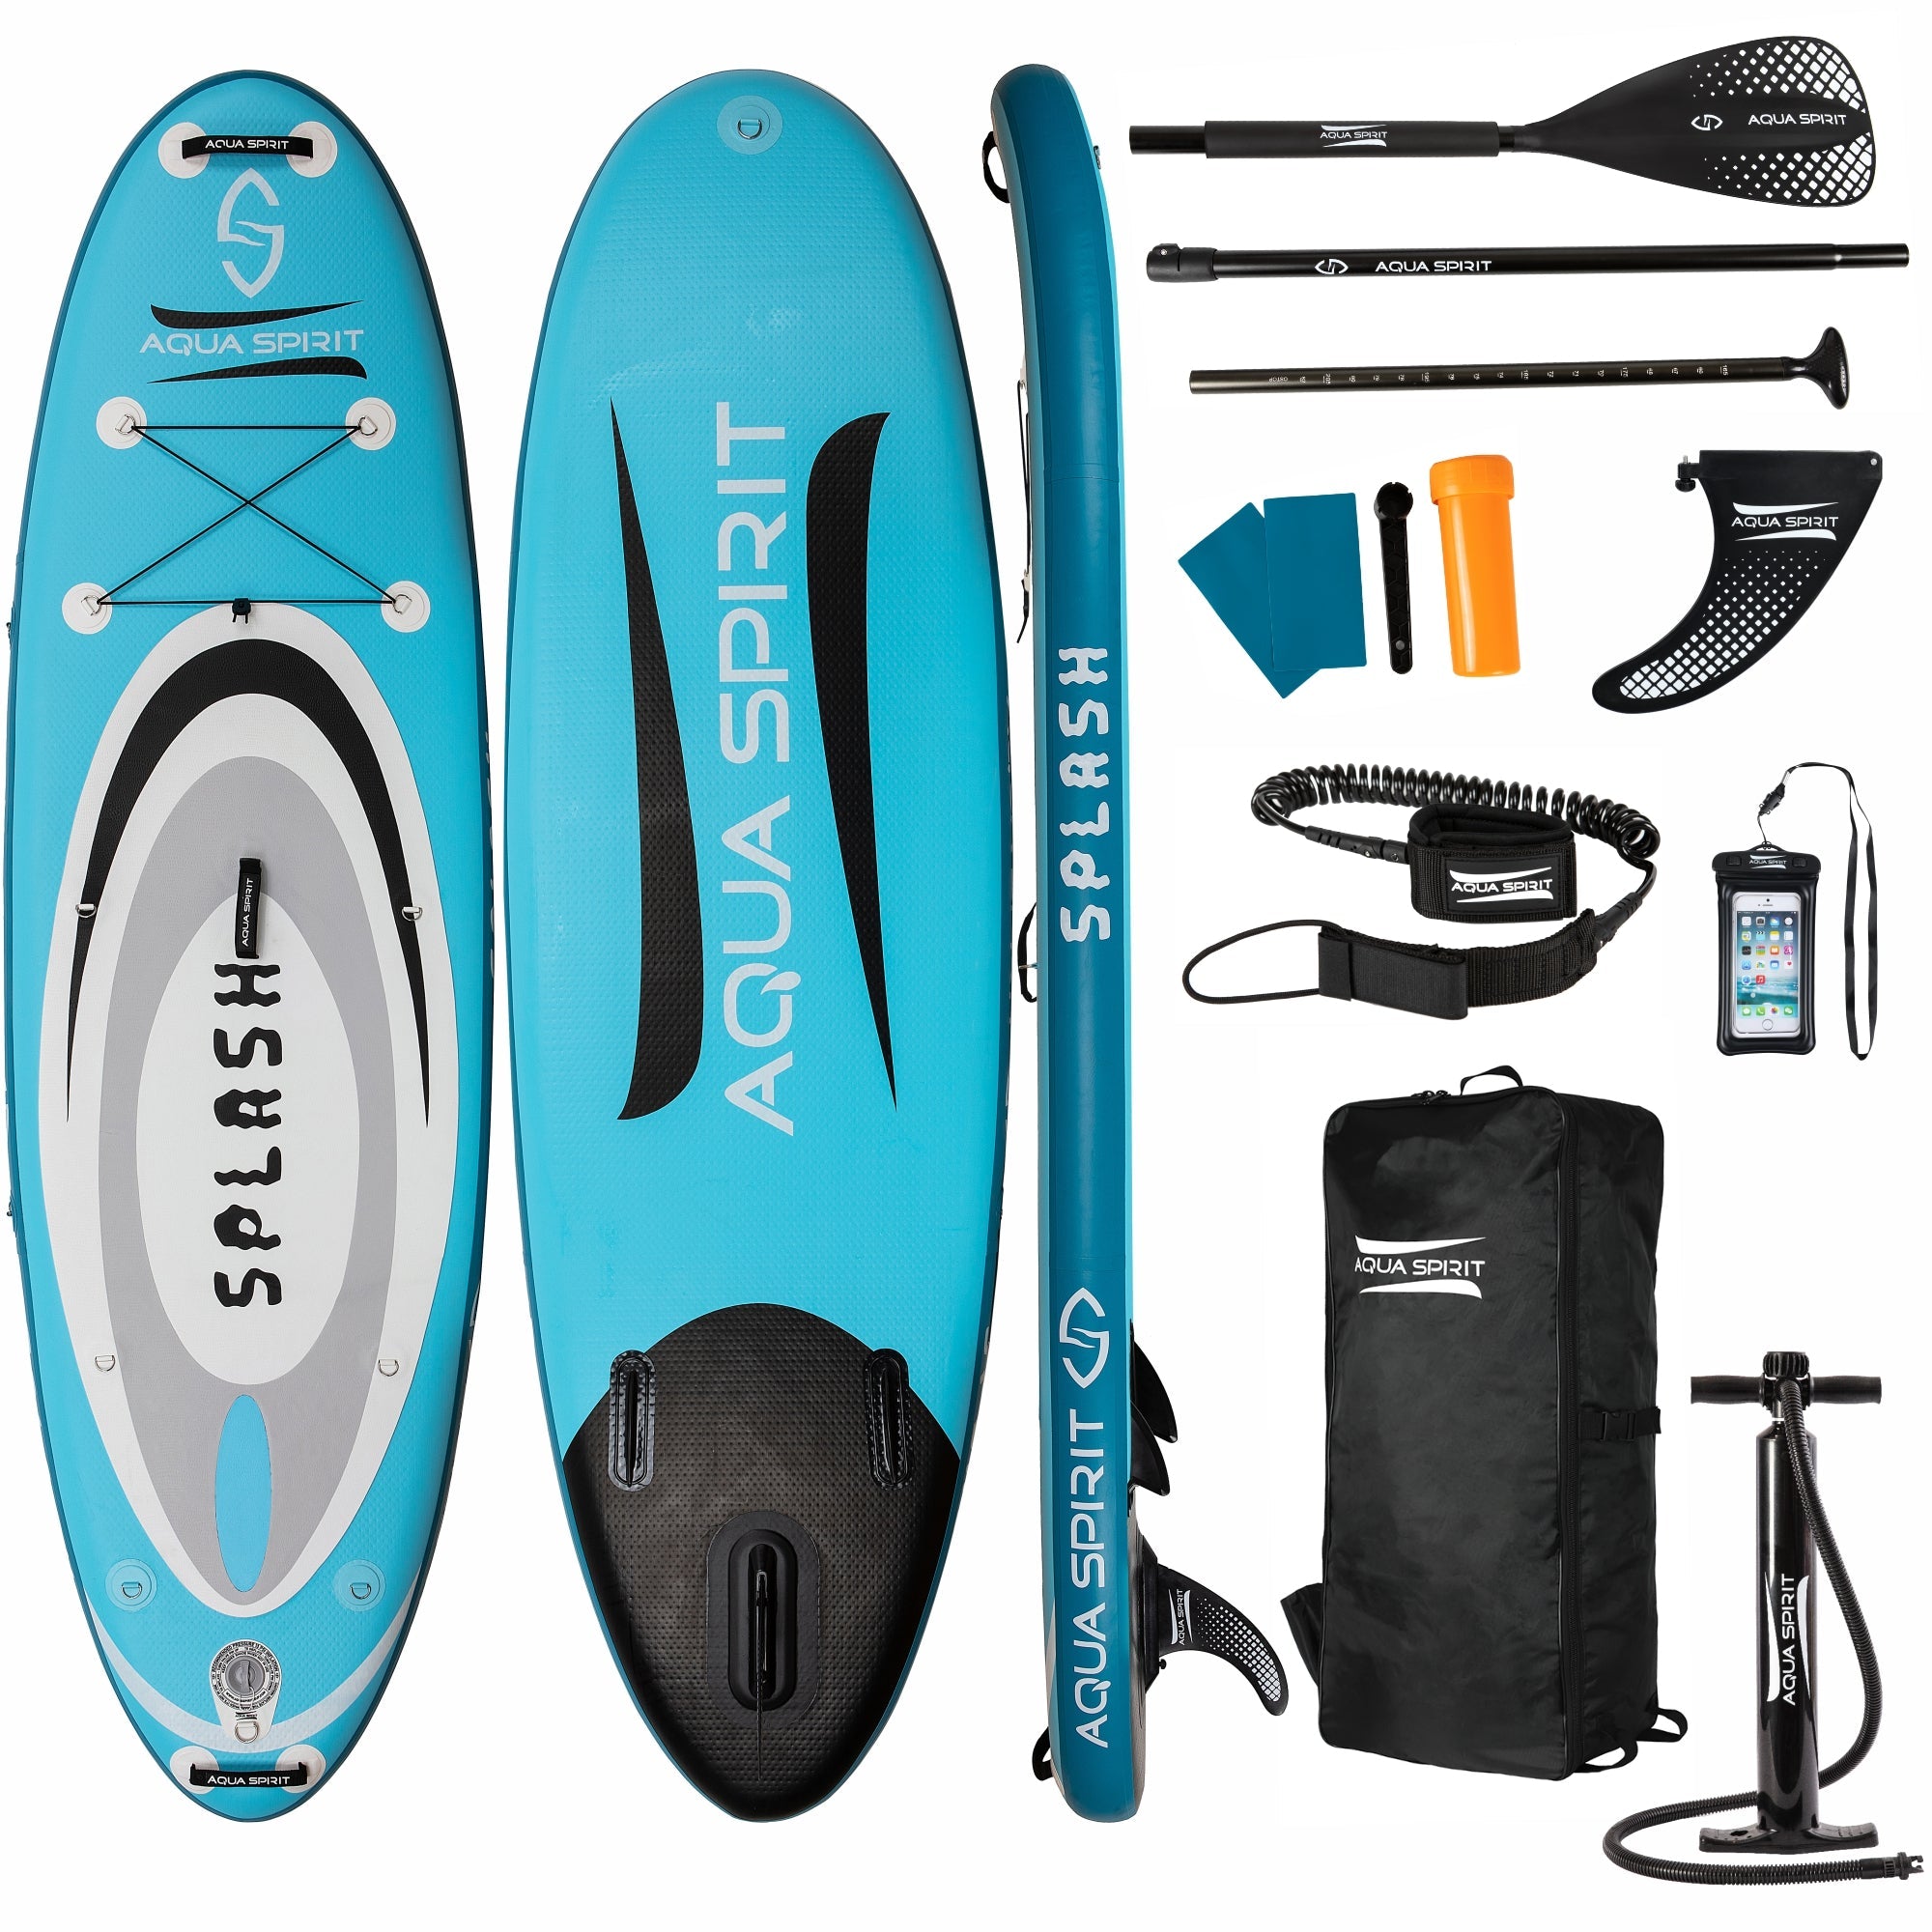 Aqua Spirit Splash Inflatable Stand Up SUP 9’x31”x6” Beginners Paddle Board For Kids/ Small Adults With Accessories, Paddle, Pump, Back Pack, Leash, Repair Kit, 2 Year Warranty - Aqua Spirit iSUPs